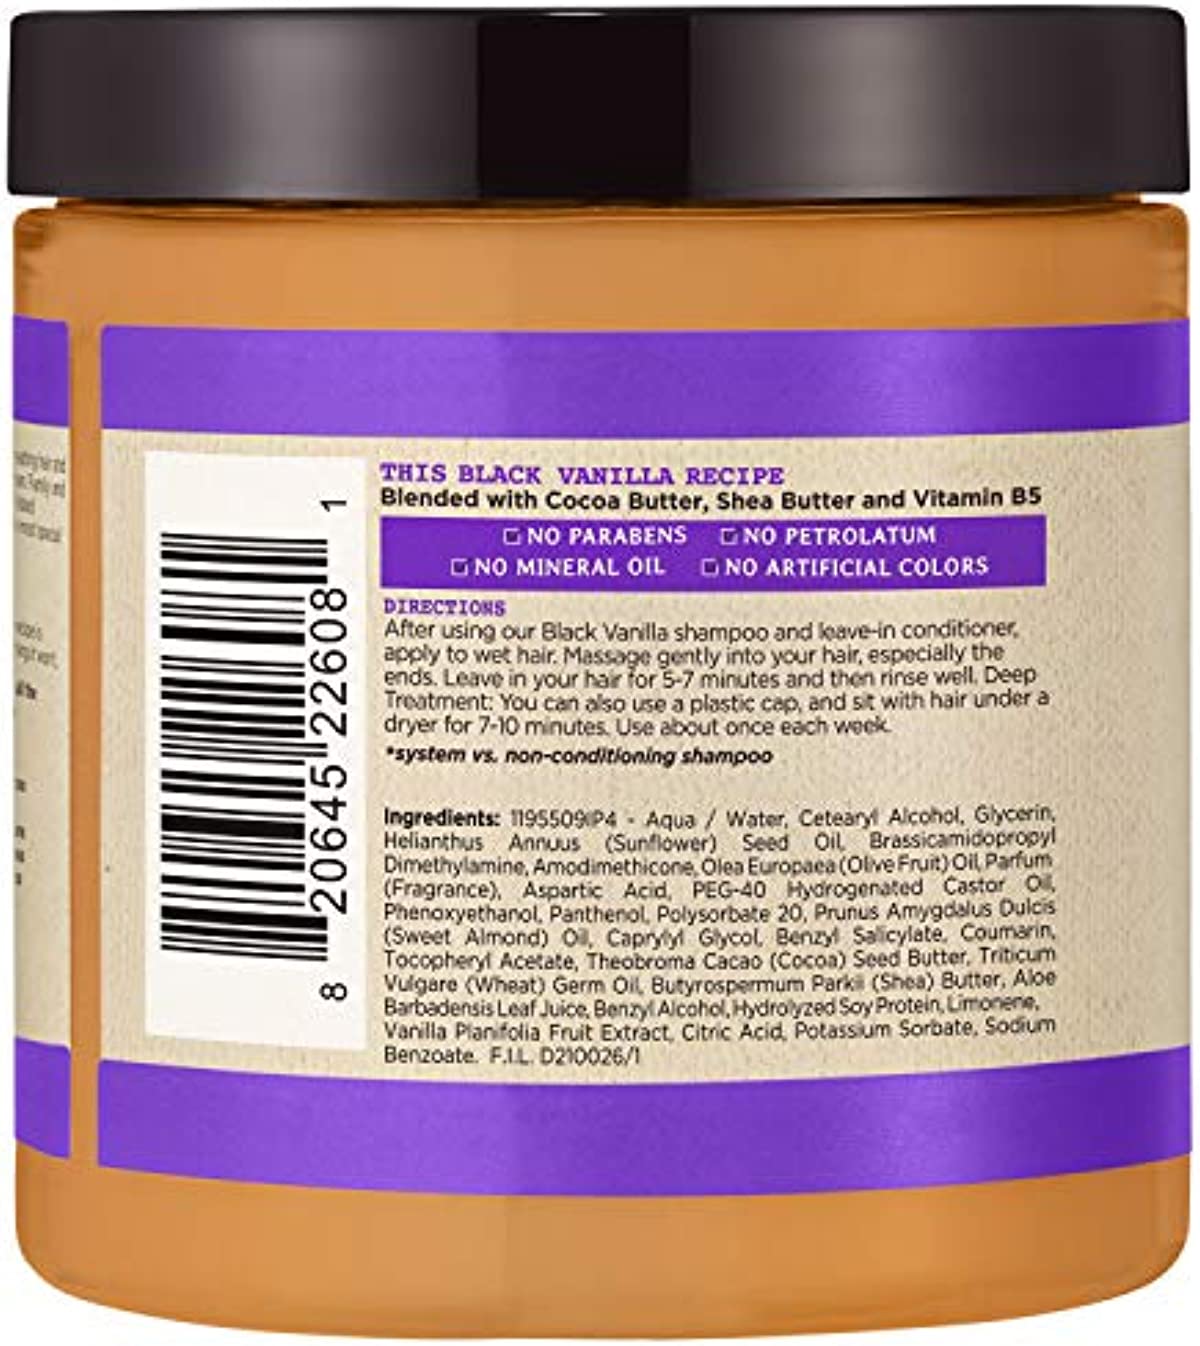 Carol\'s Daughter Black Vanilla Moisture and Shine Hair Smoothie For Dry Hair and Dull Hair, with Shea Butter, Cocoa Butter and Vitamin B5, Paraben Free Hair Treatment, 8 oz (Packaging May Vary)